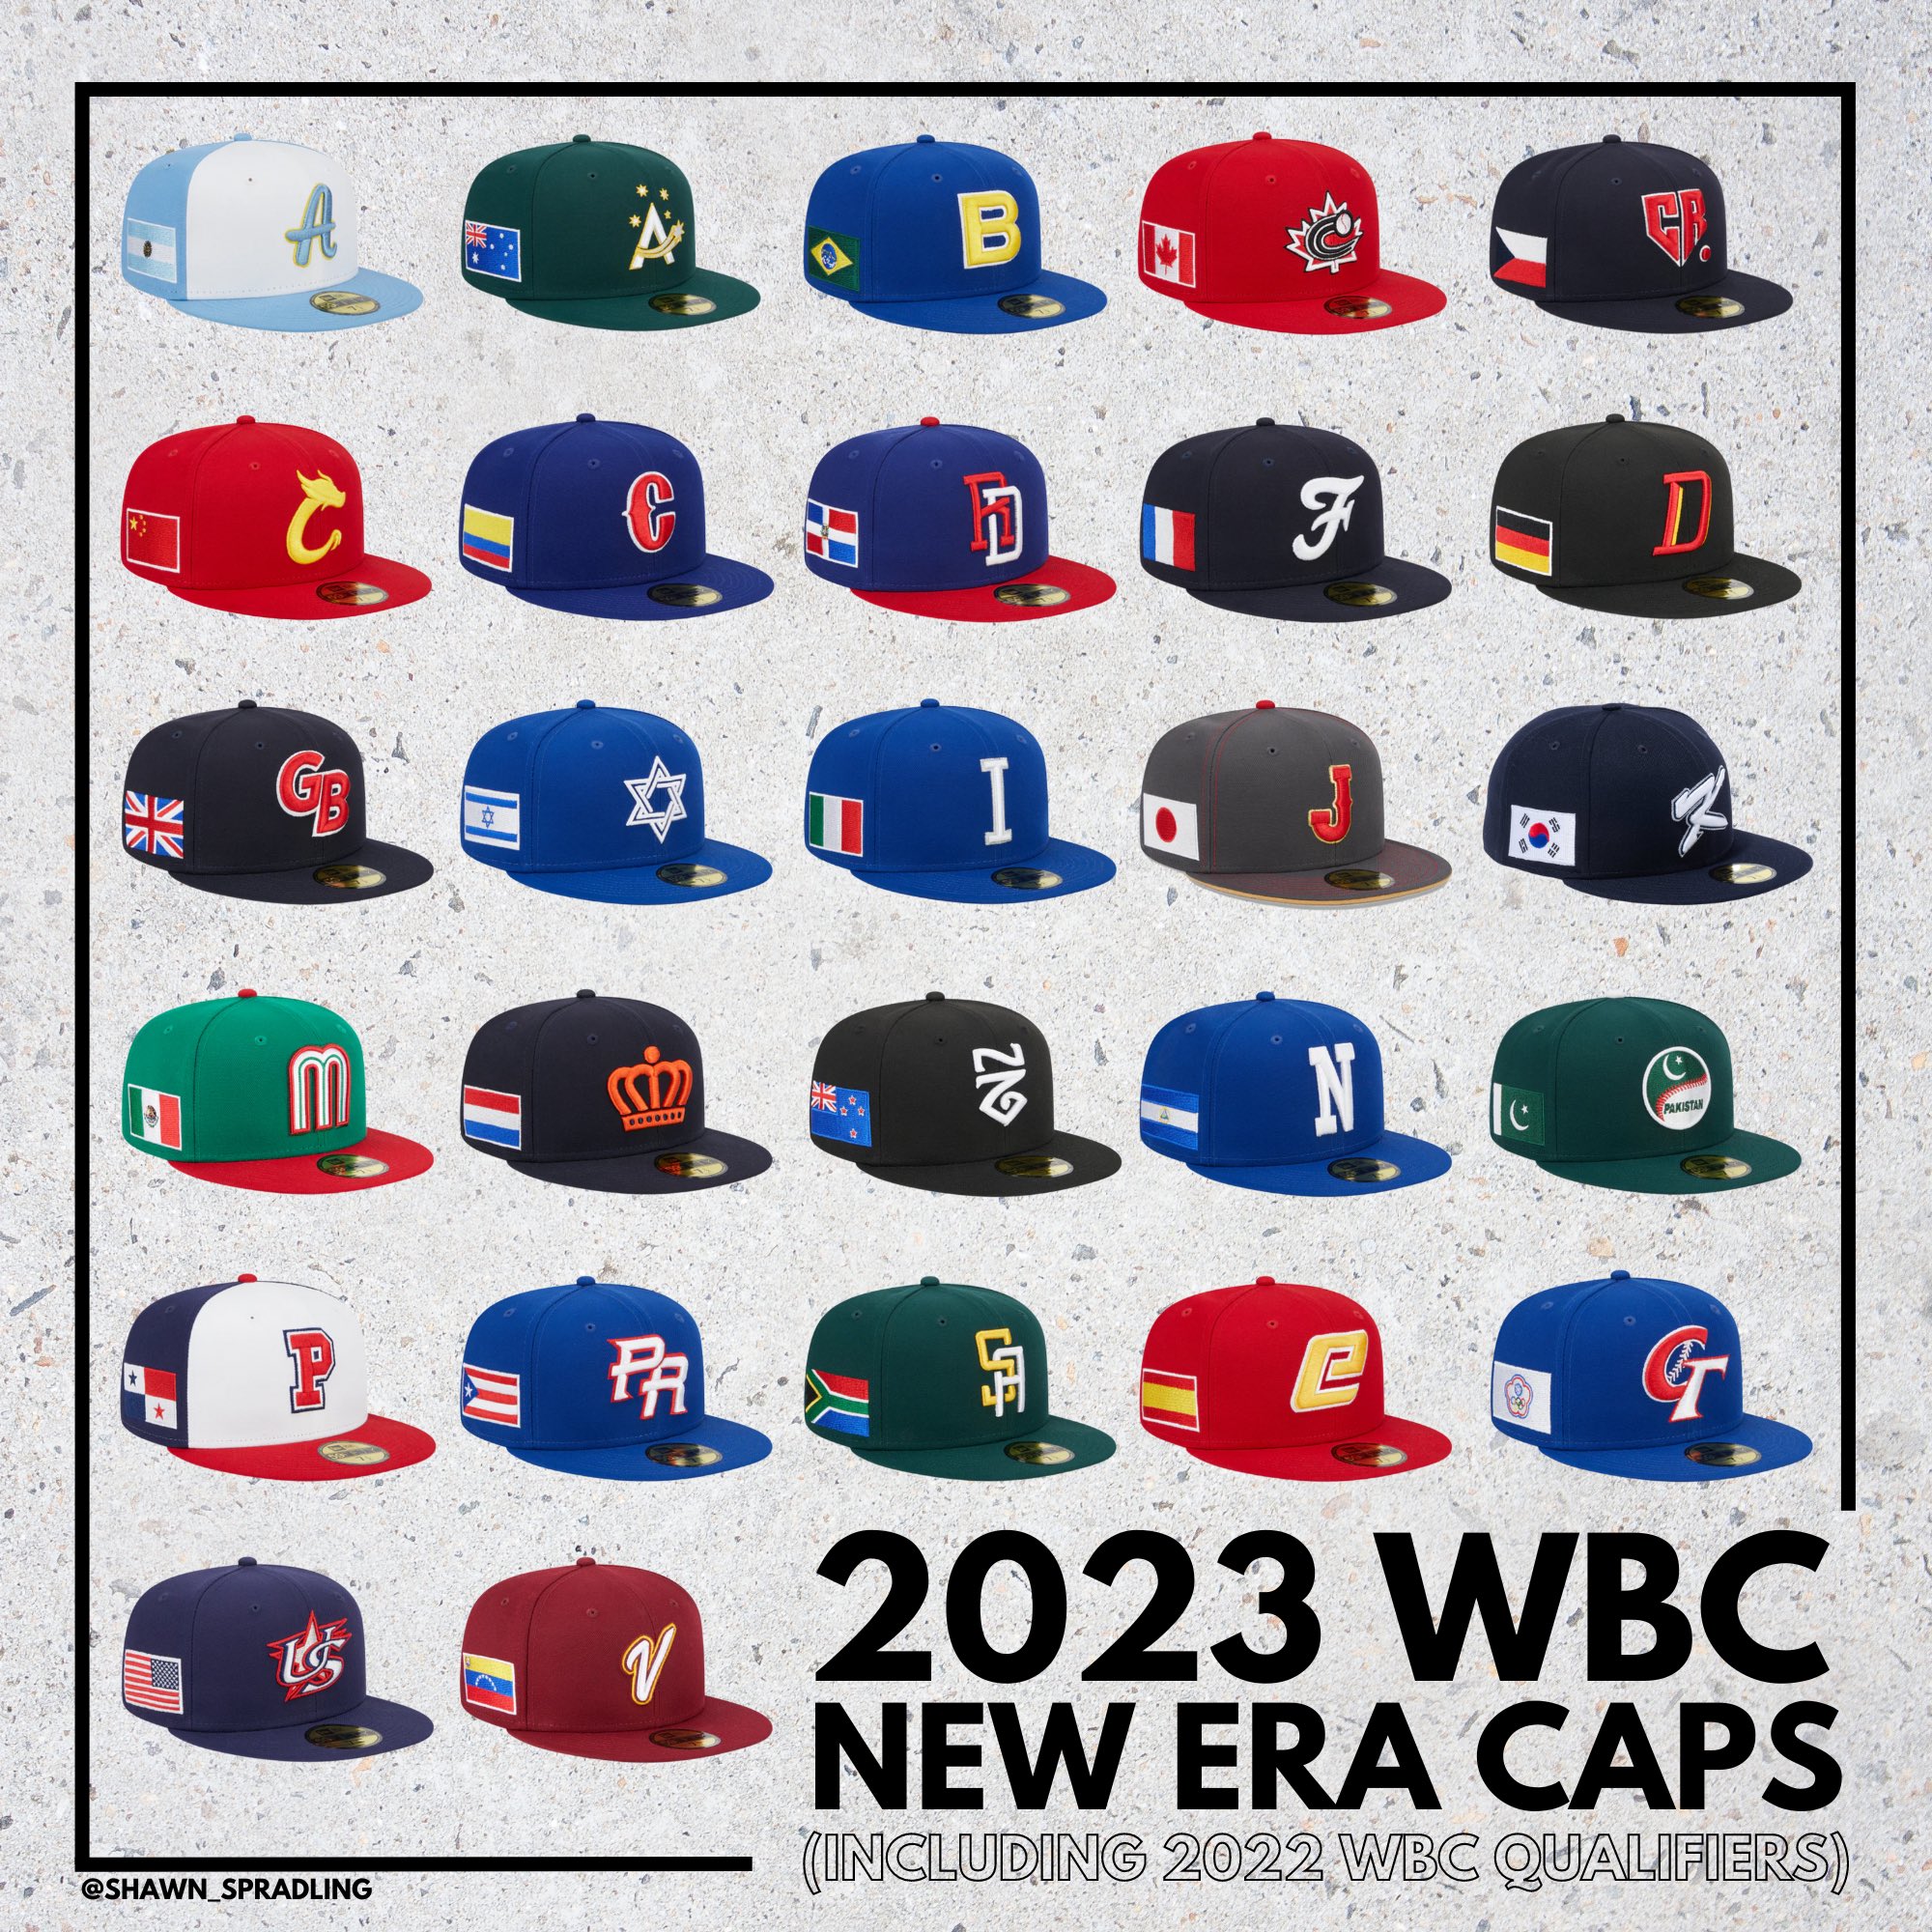 MLB Spring Training 2023 hats are here Where to buy Grapefruit Cactus  League gear online  syracusecom